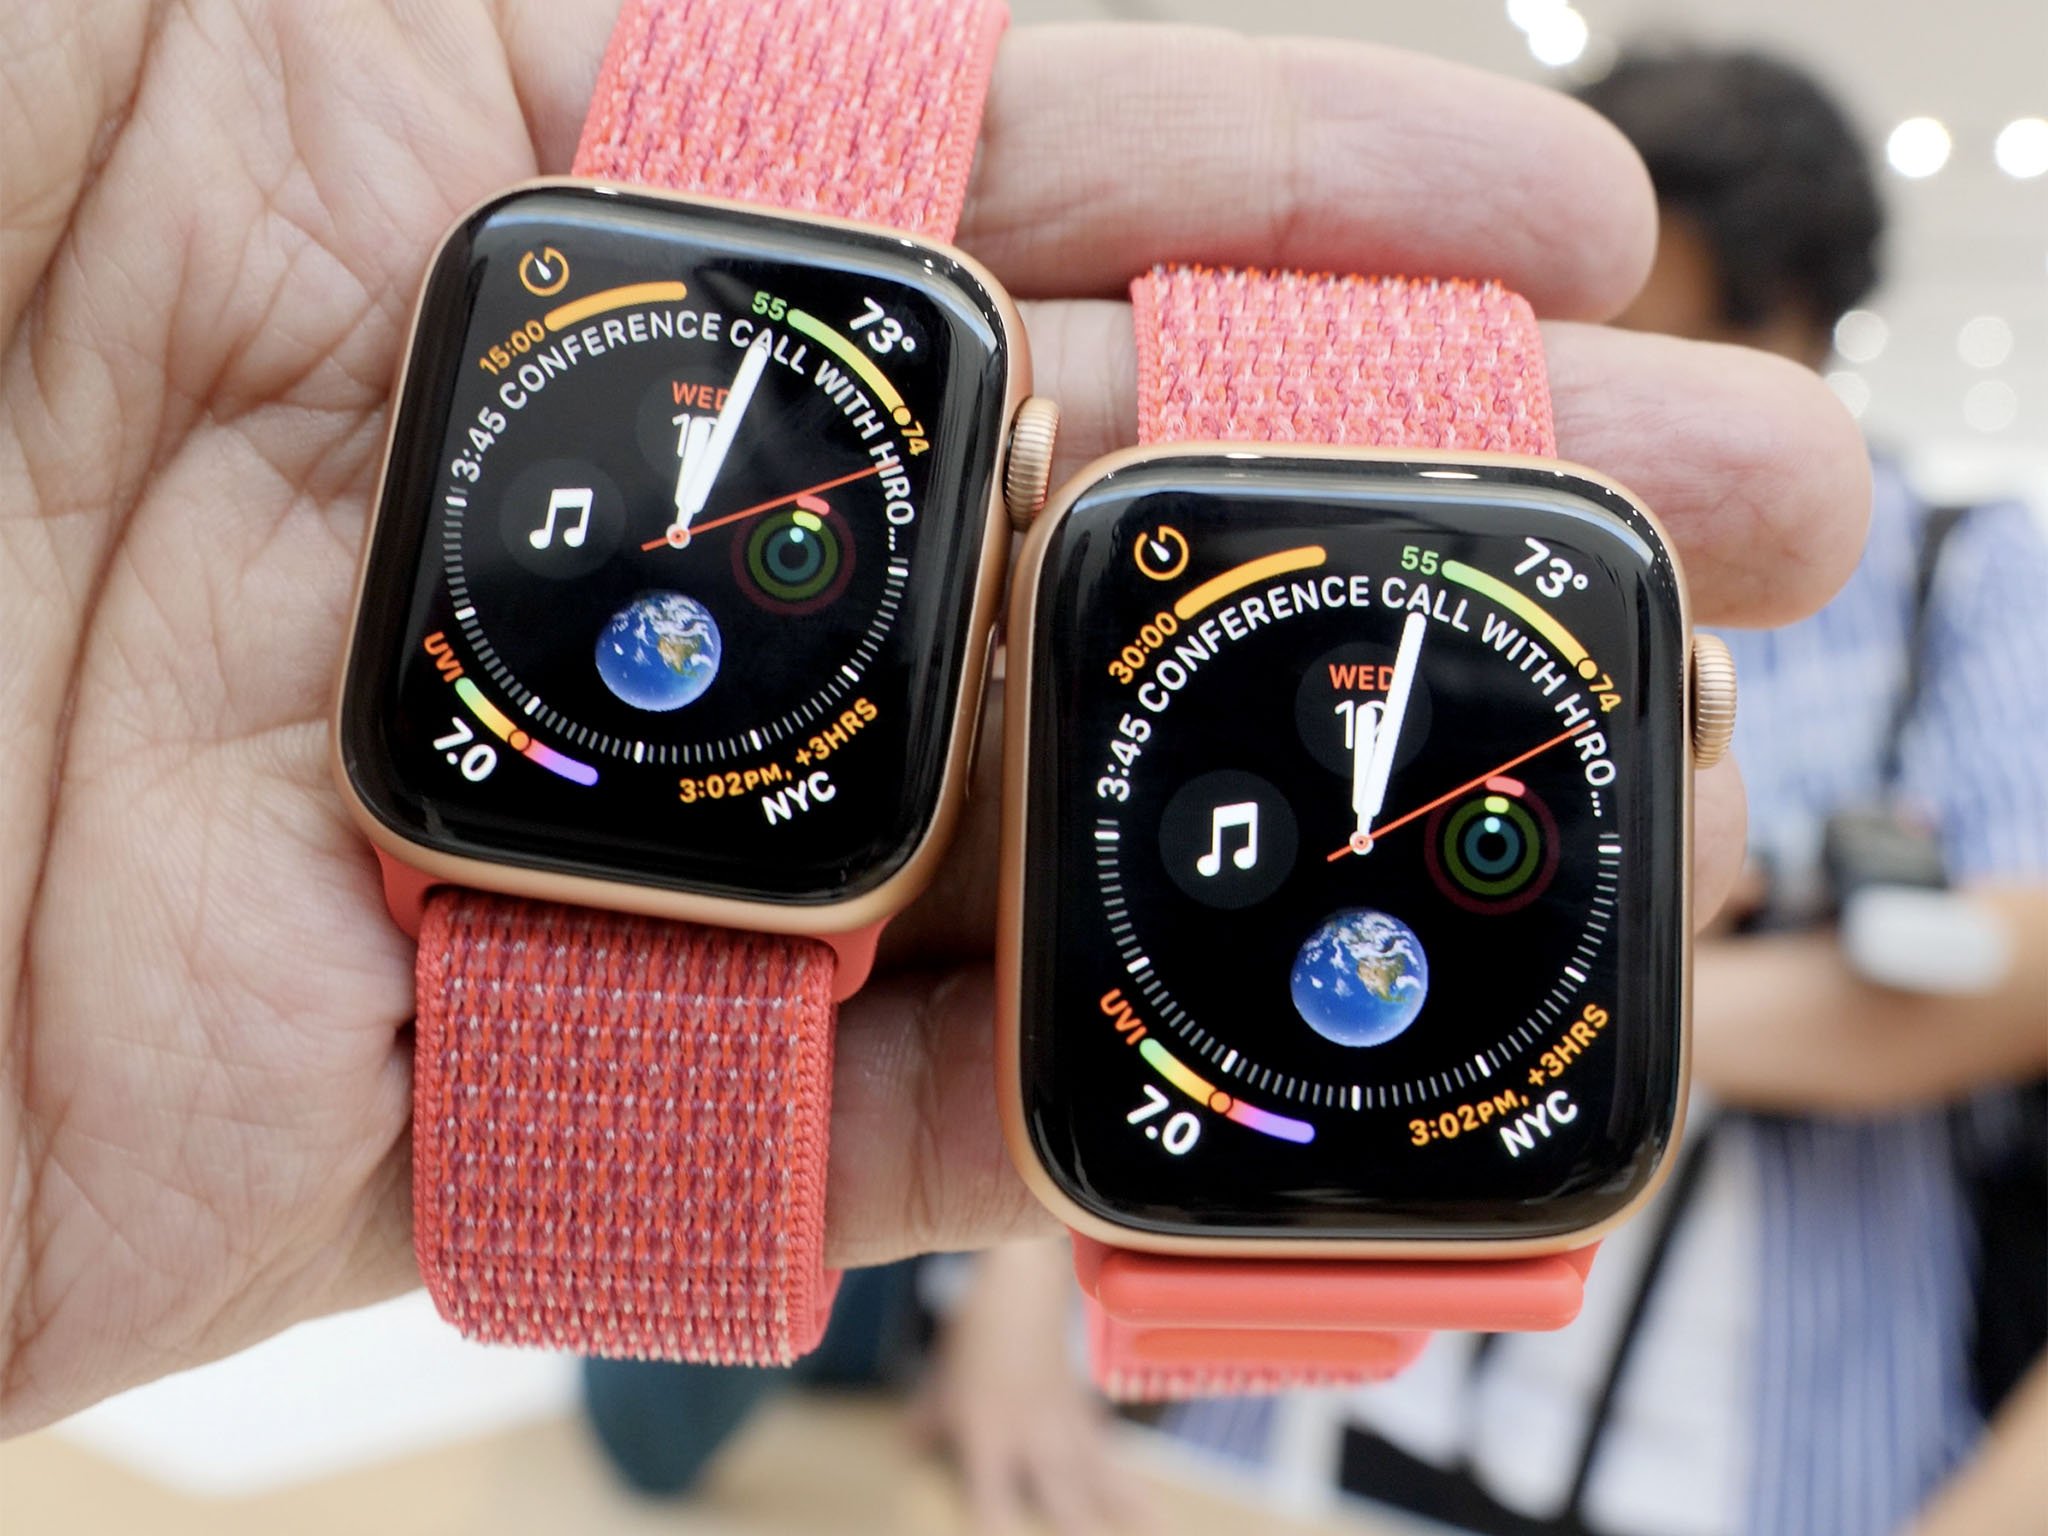 Apple Watch Cellular vs GPS: What's the difference? | iMore